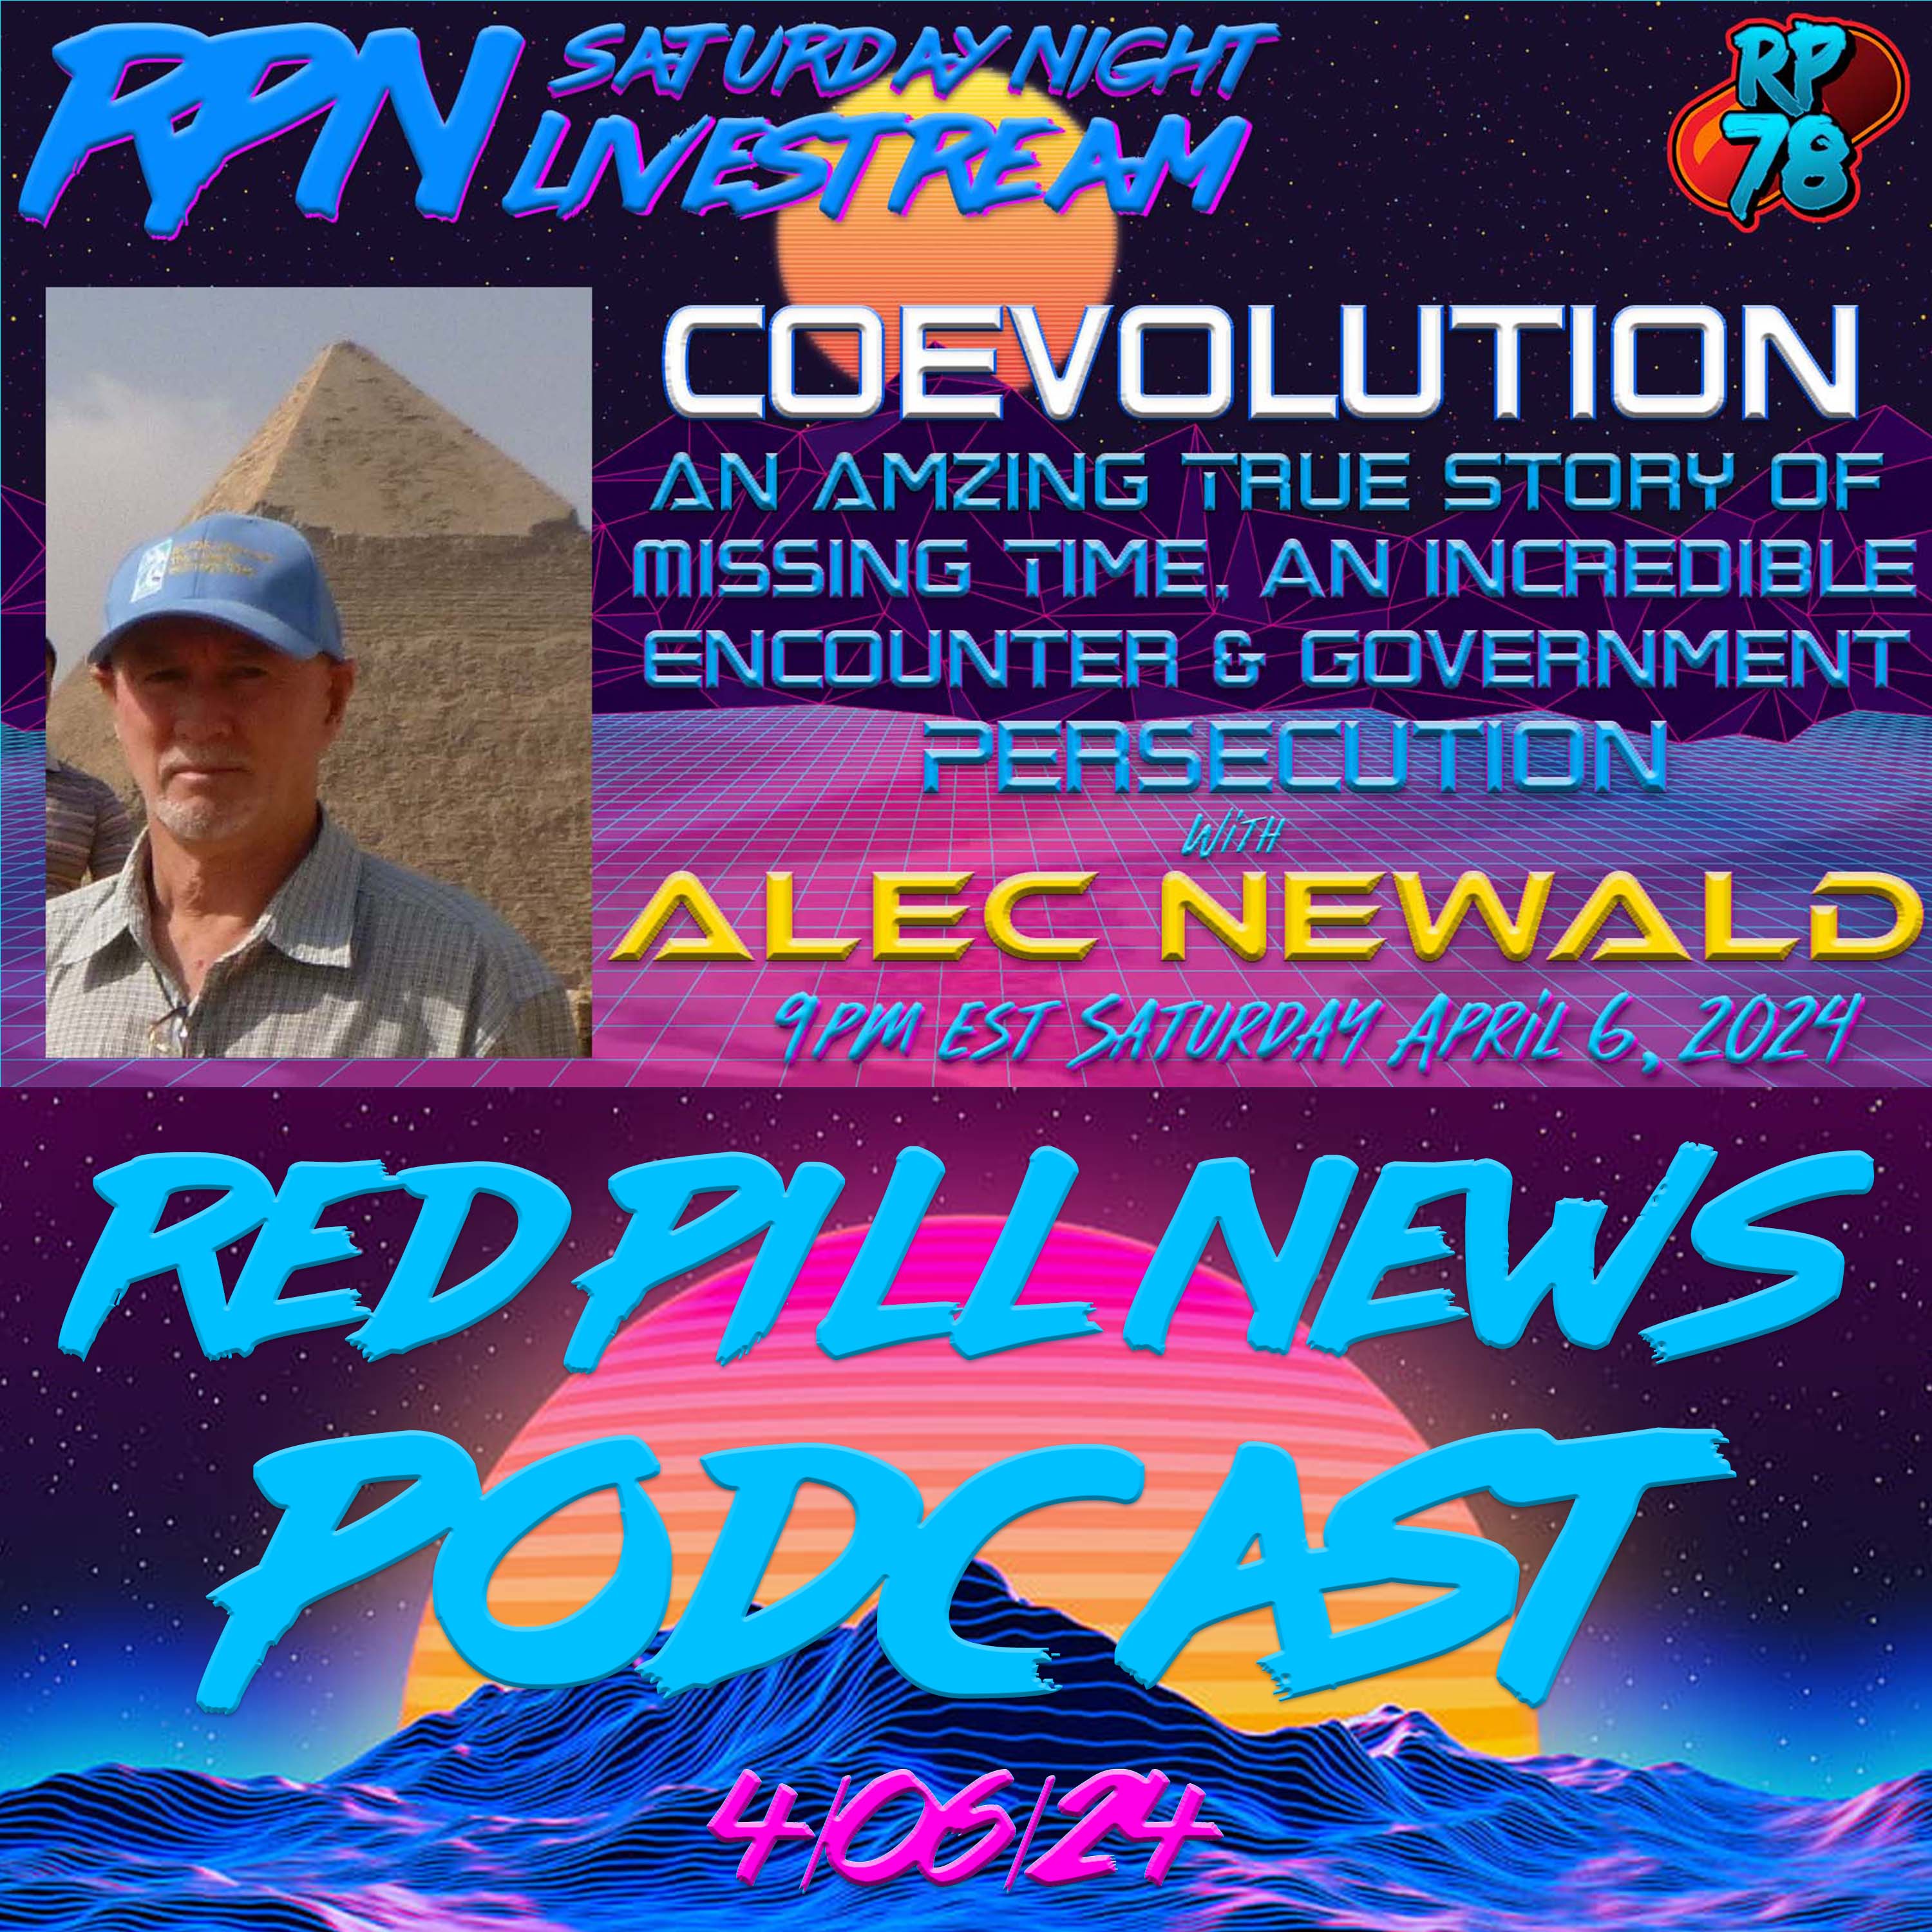 Coevolution - How 10 Days of Missing Time Changed the Life of Alec Newald on Sat. Night Livestream